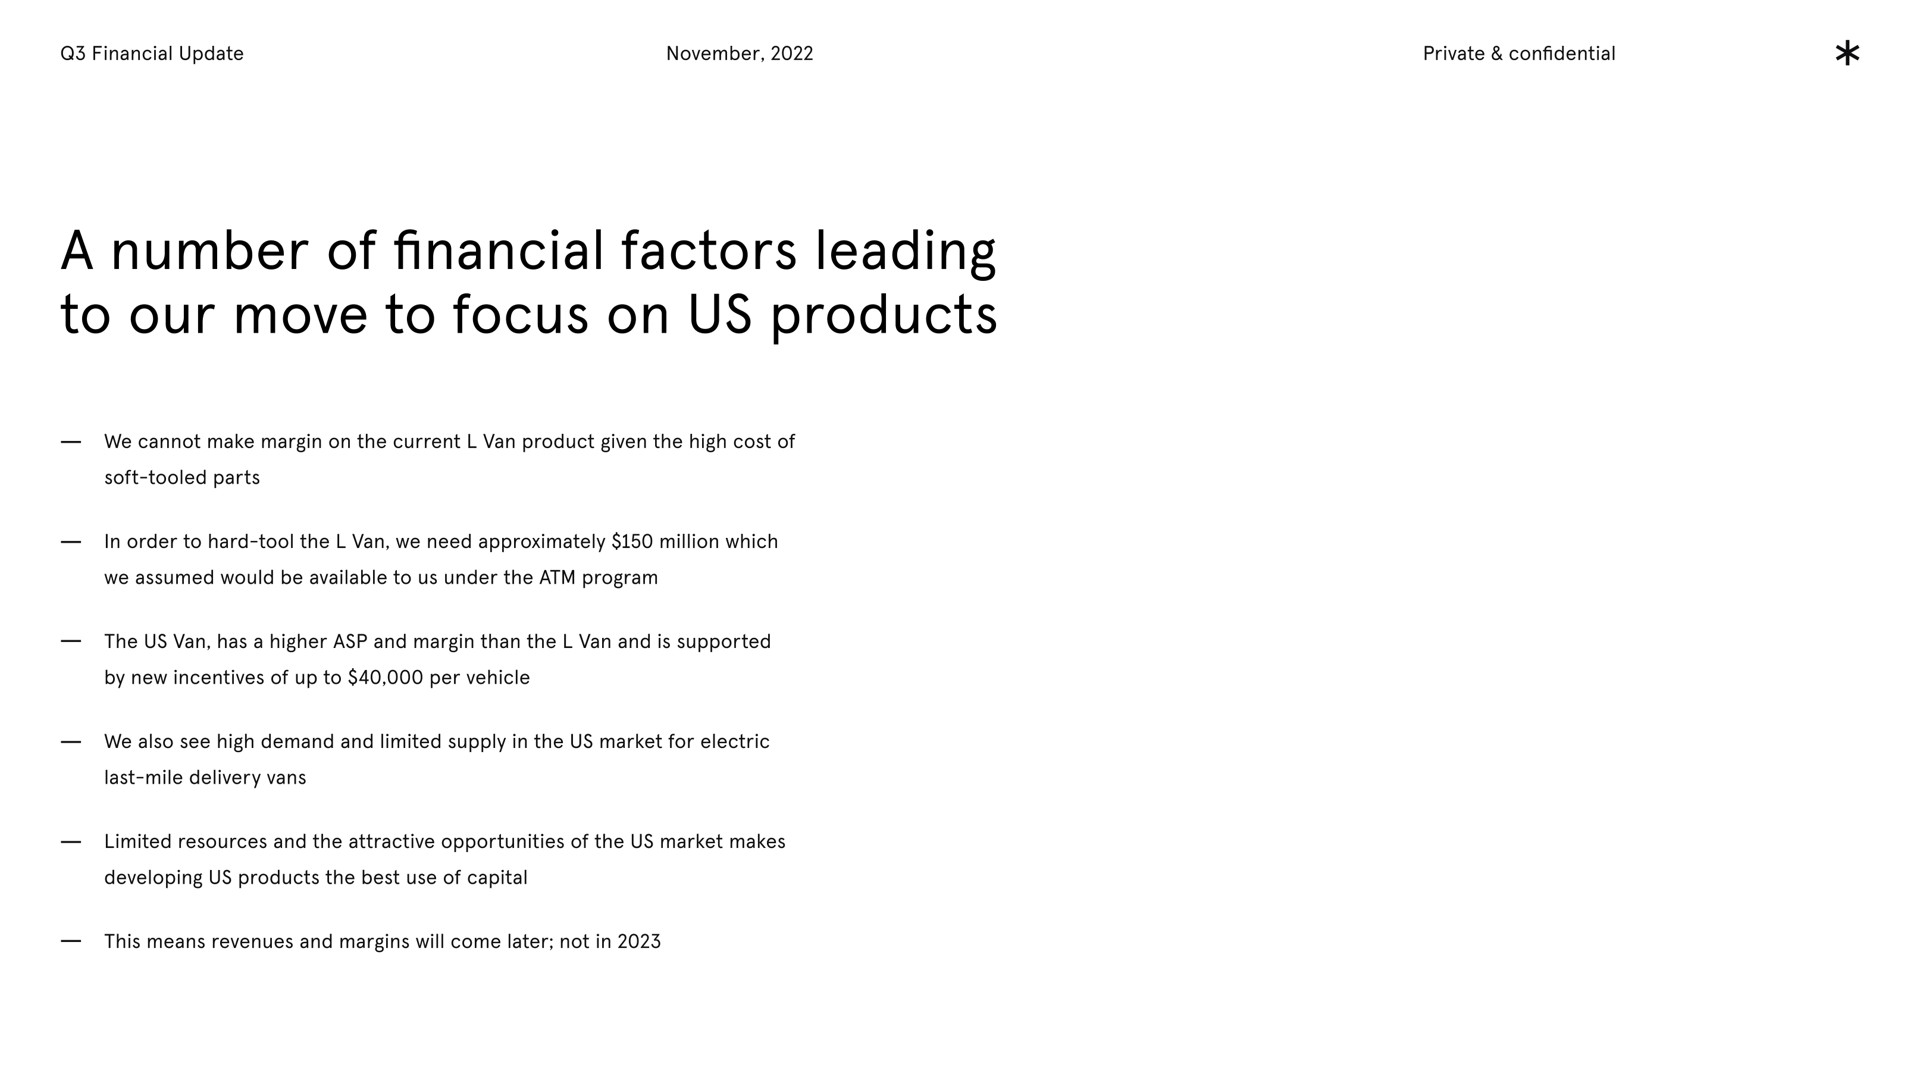 financial update private confidential a number of financial factors leading to our move to focus on us products we cannot make margin on the current van product given the high cost of soft tooled parts in order to hard tool the van we need approximately million which we assumed would be available to us under the program the us van has a higher asp and margin than the van and is supported by new incentives of up to per vehicle we also see high demand and limited supply in the us market for electric last mile delivery vans limited resources and the attractive opportunities of the us market makes developing us products the best use of capital this means revenues and margins will come later not in | Arrival